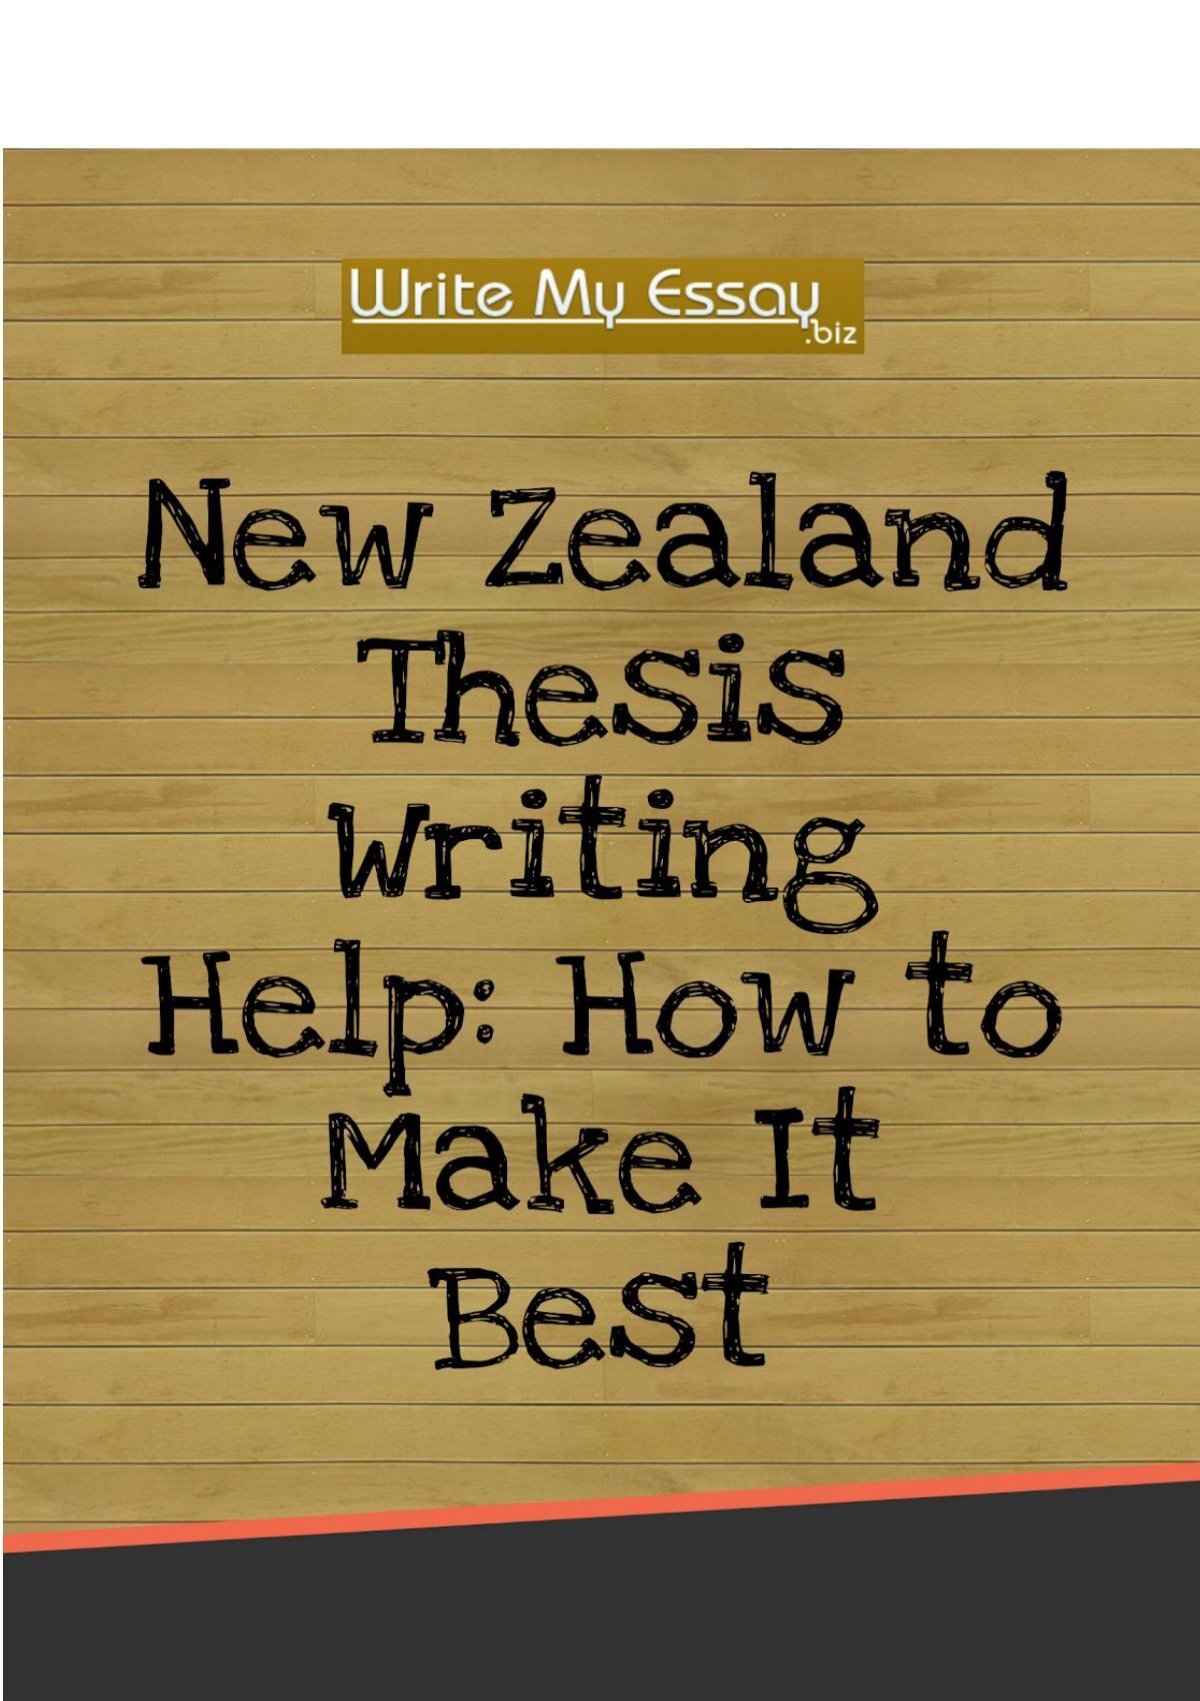 thesis in new zealand